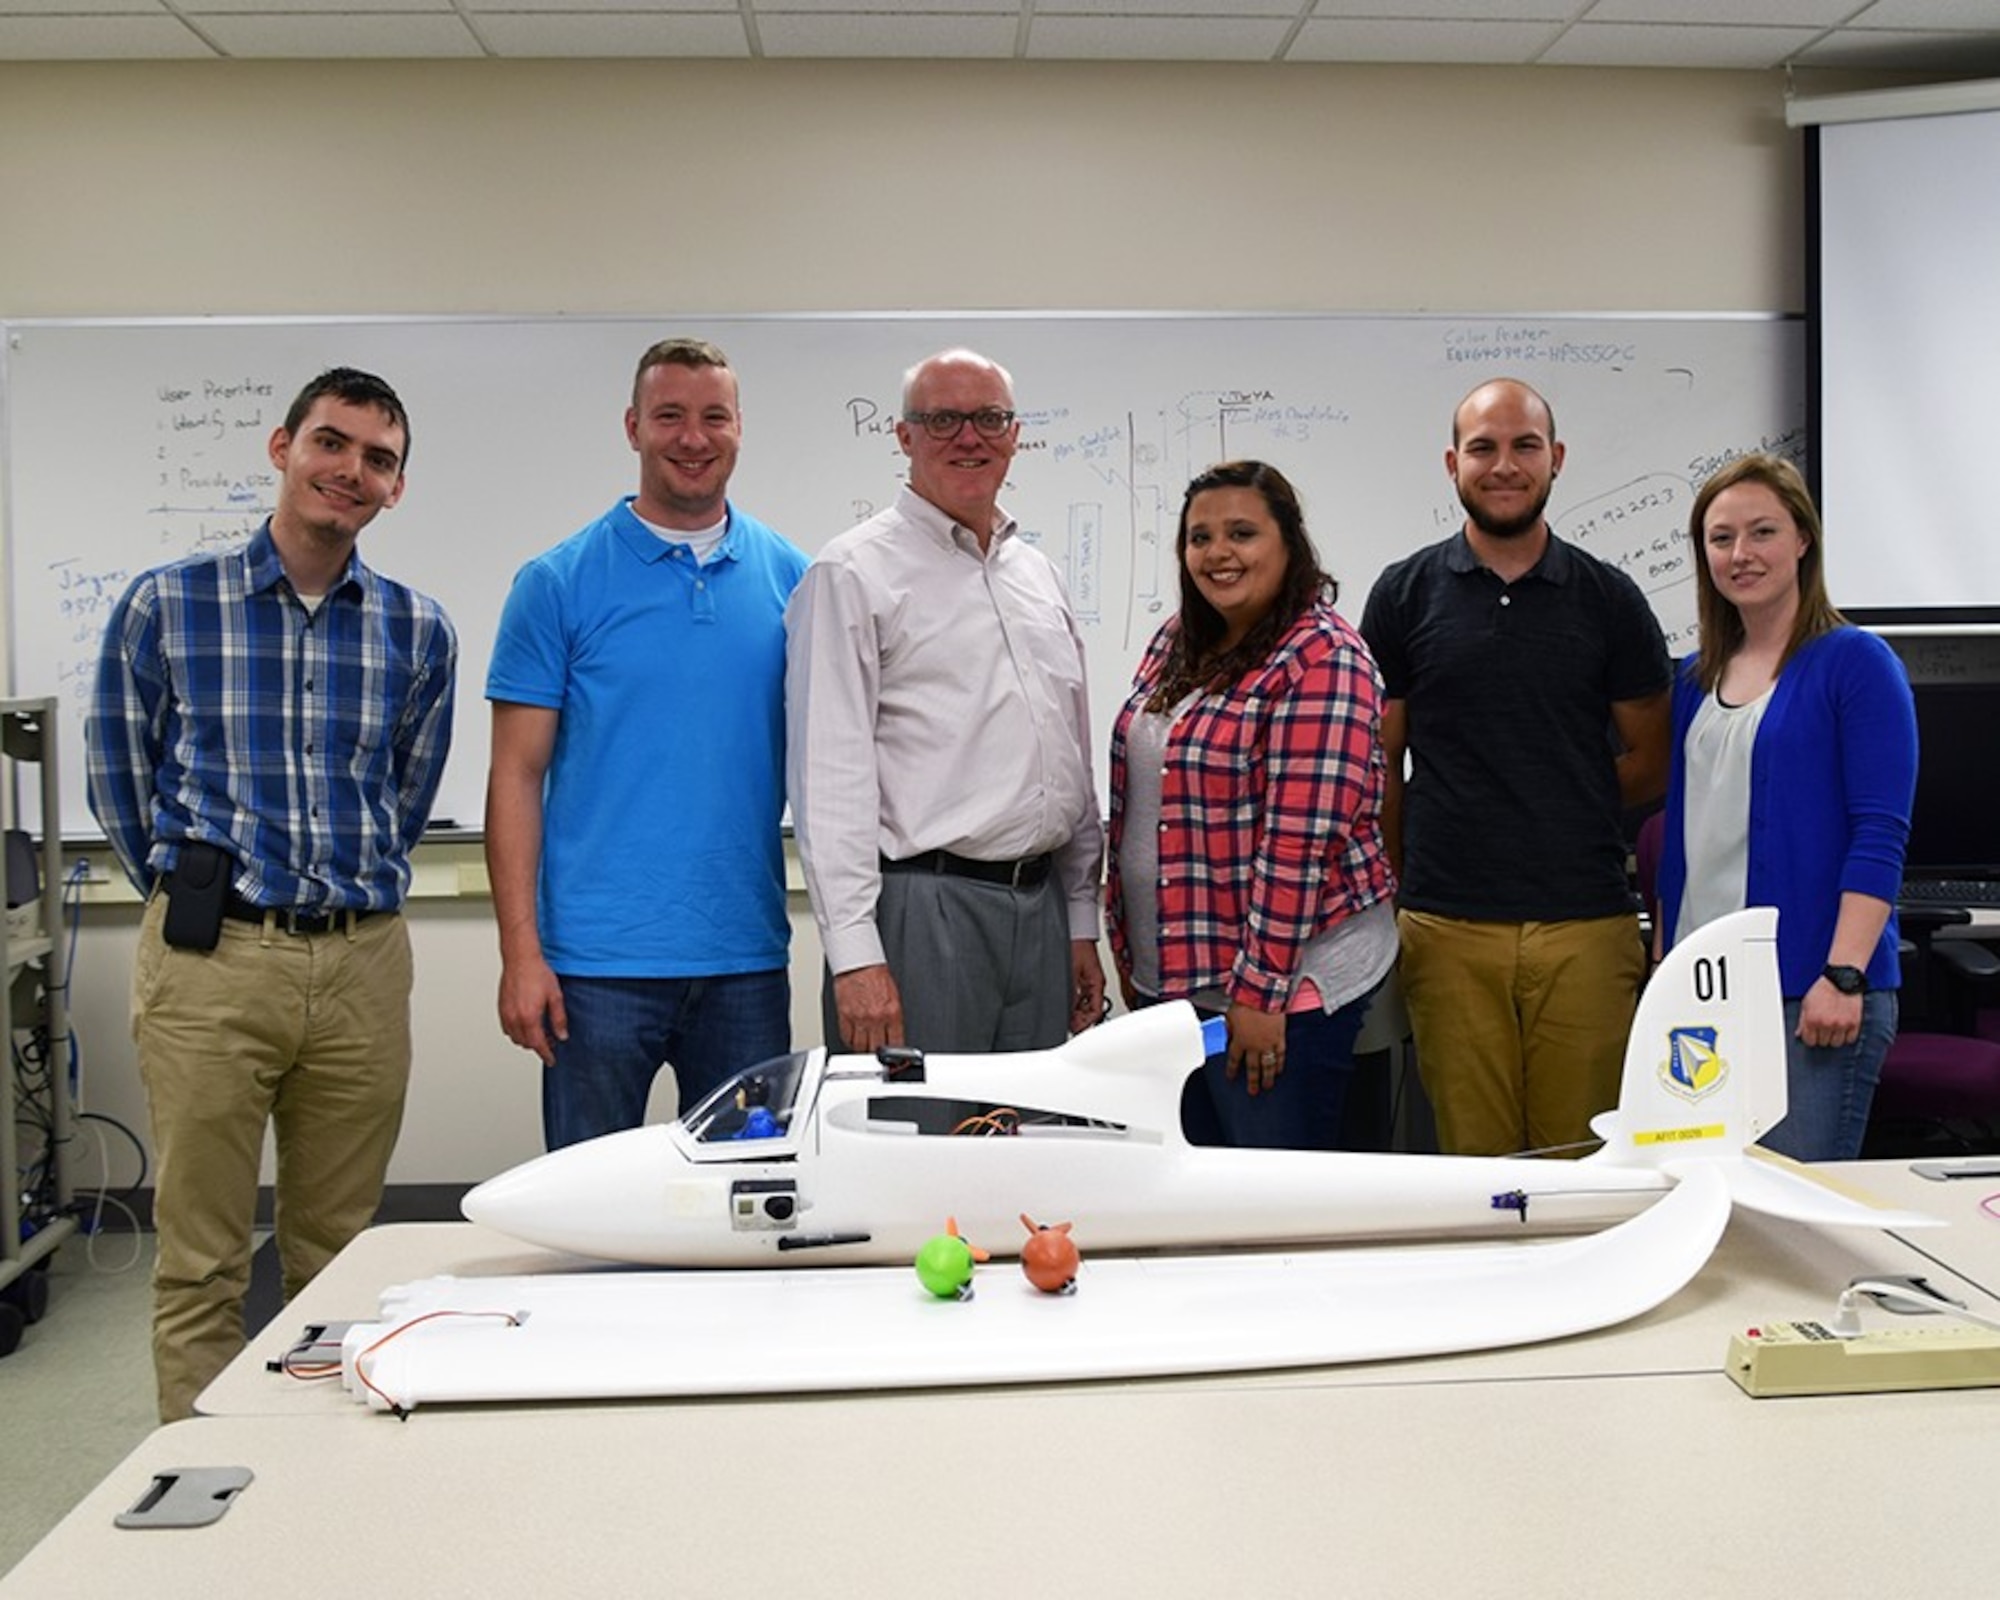 AFIT faculty member Dr. David Jacques (center), with SUCCESS Program interns John Wintersohle, Jamie Workman, Morgan Oldham, Evan Lynd, and Caitlin Jenkins. (Courtesy photo)